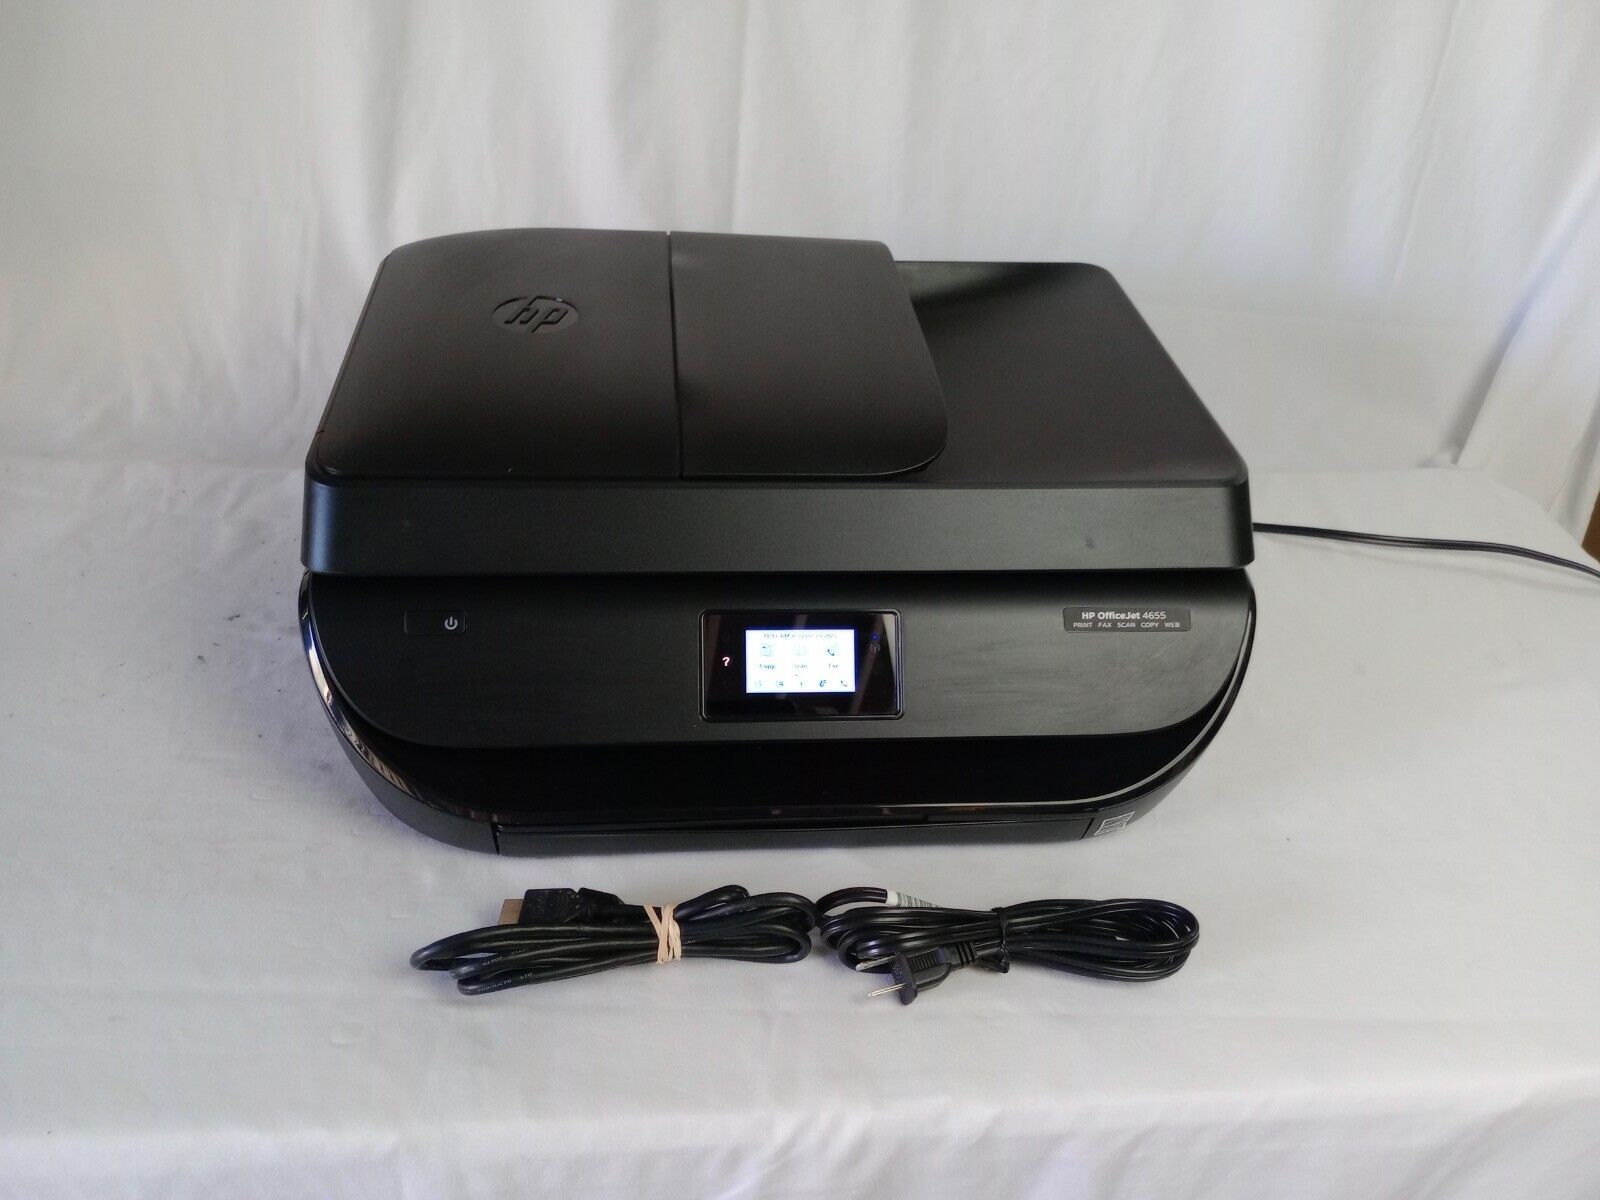 HP OfficeJet 4652 4650 All-in-One Printer Tested Works Low Pages Printed.